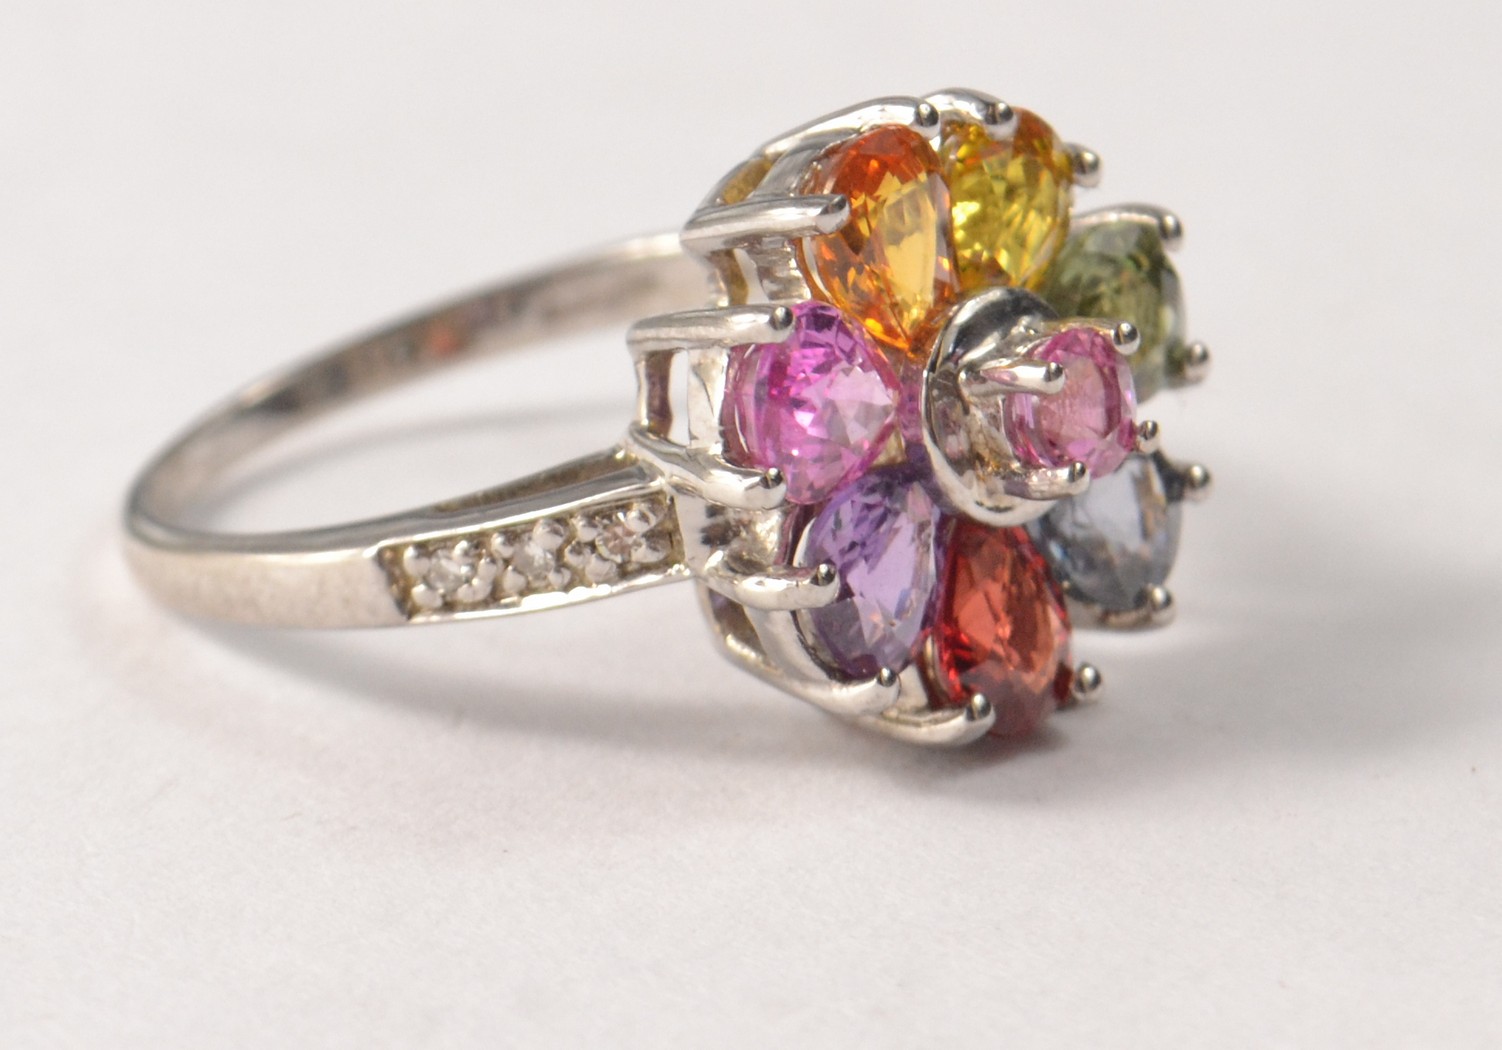 9ct white gold floral multi sapphire ring 3.65g gross weight size N/O - Image 7 of 11